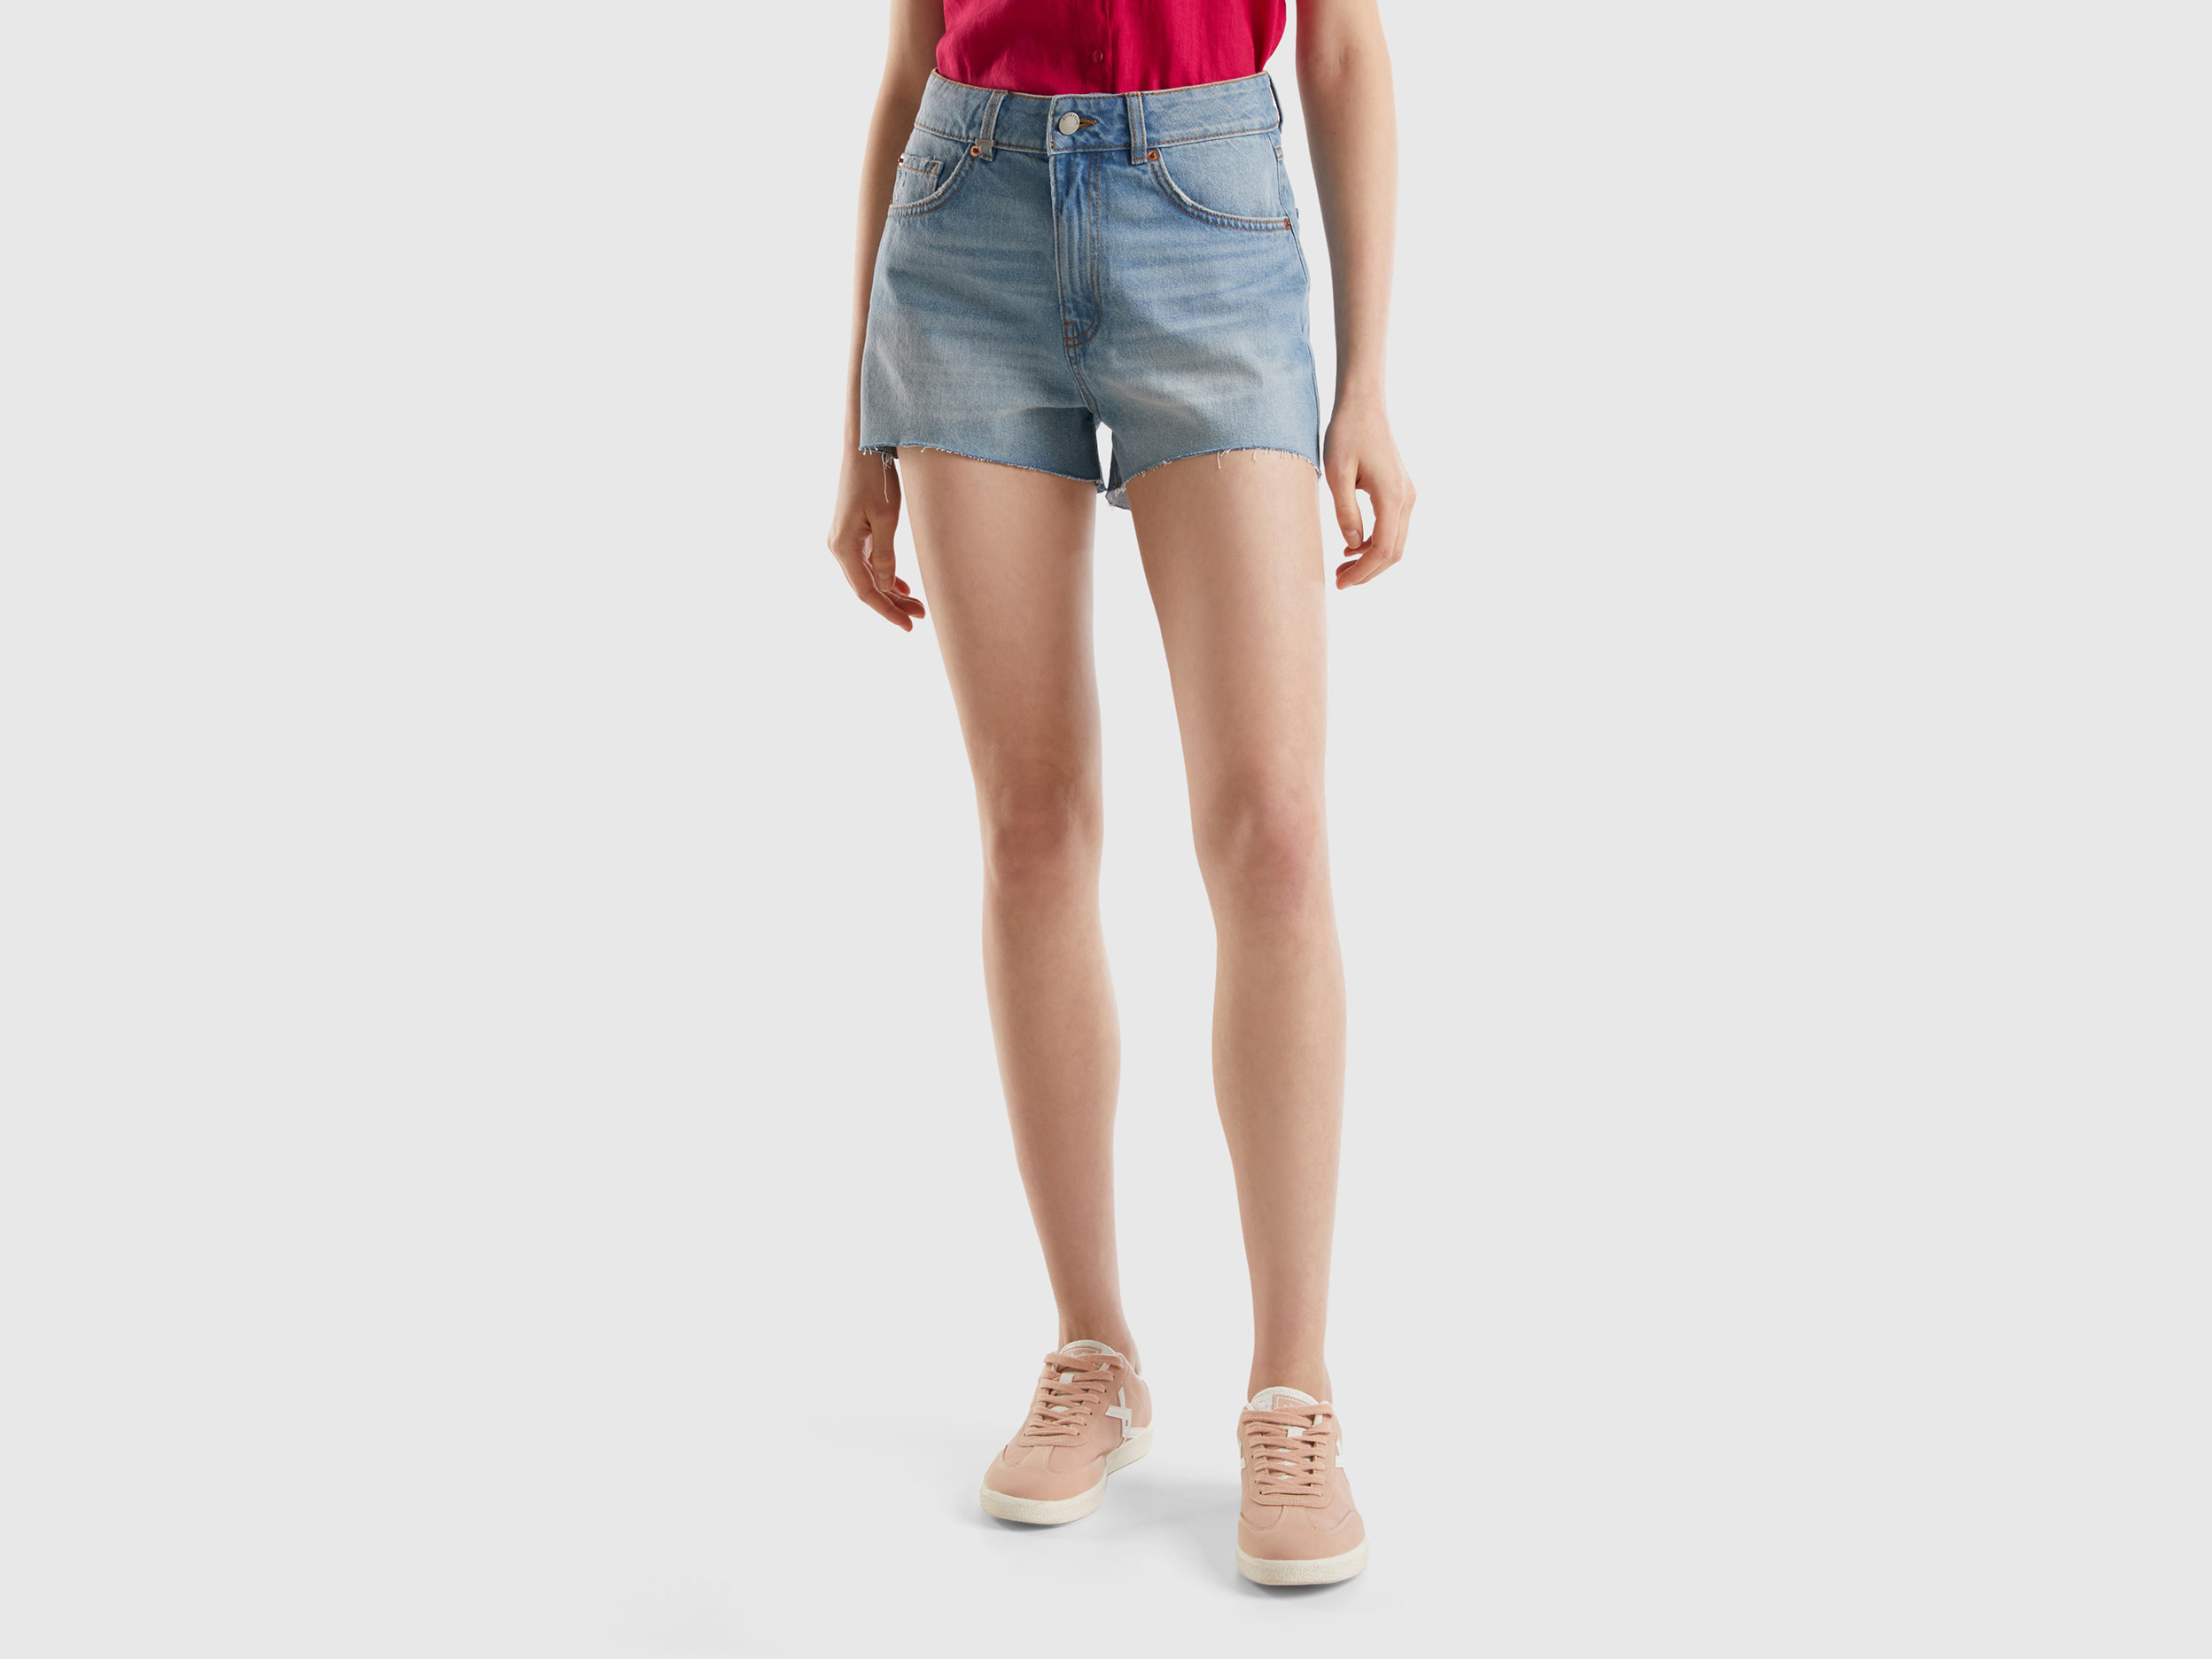 Image of Benetton, Frayed Shorts In Recycled Cotton Blend, size 28, Light Blue, Women